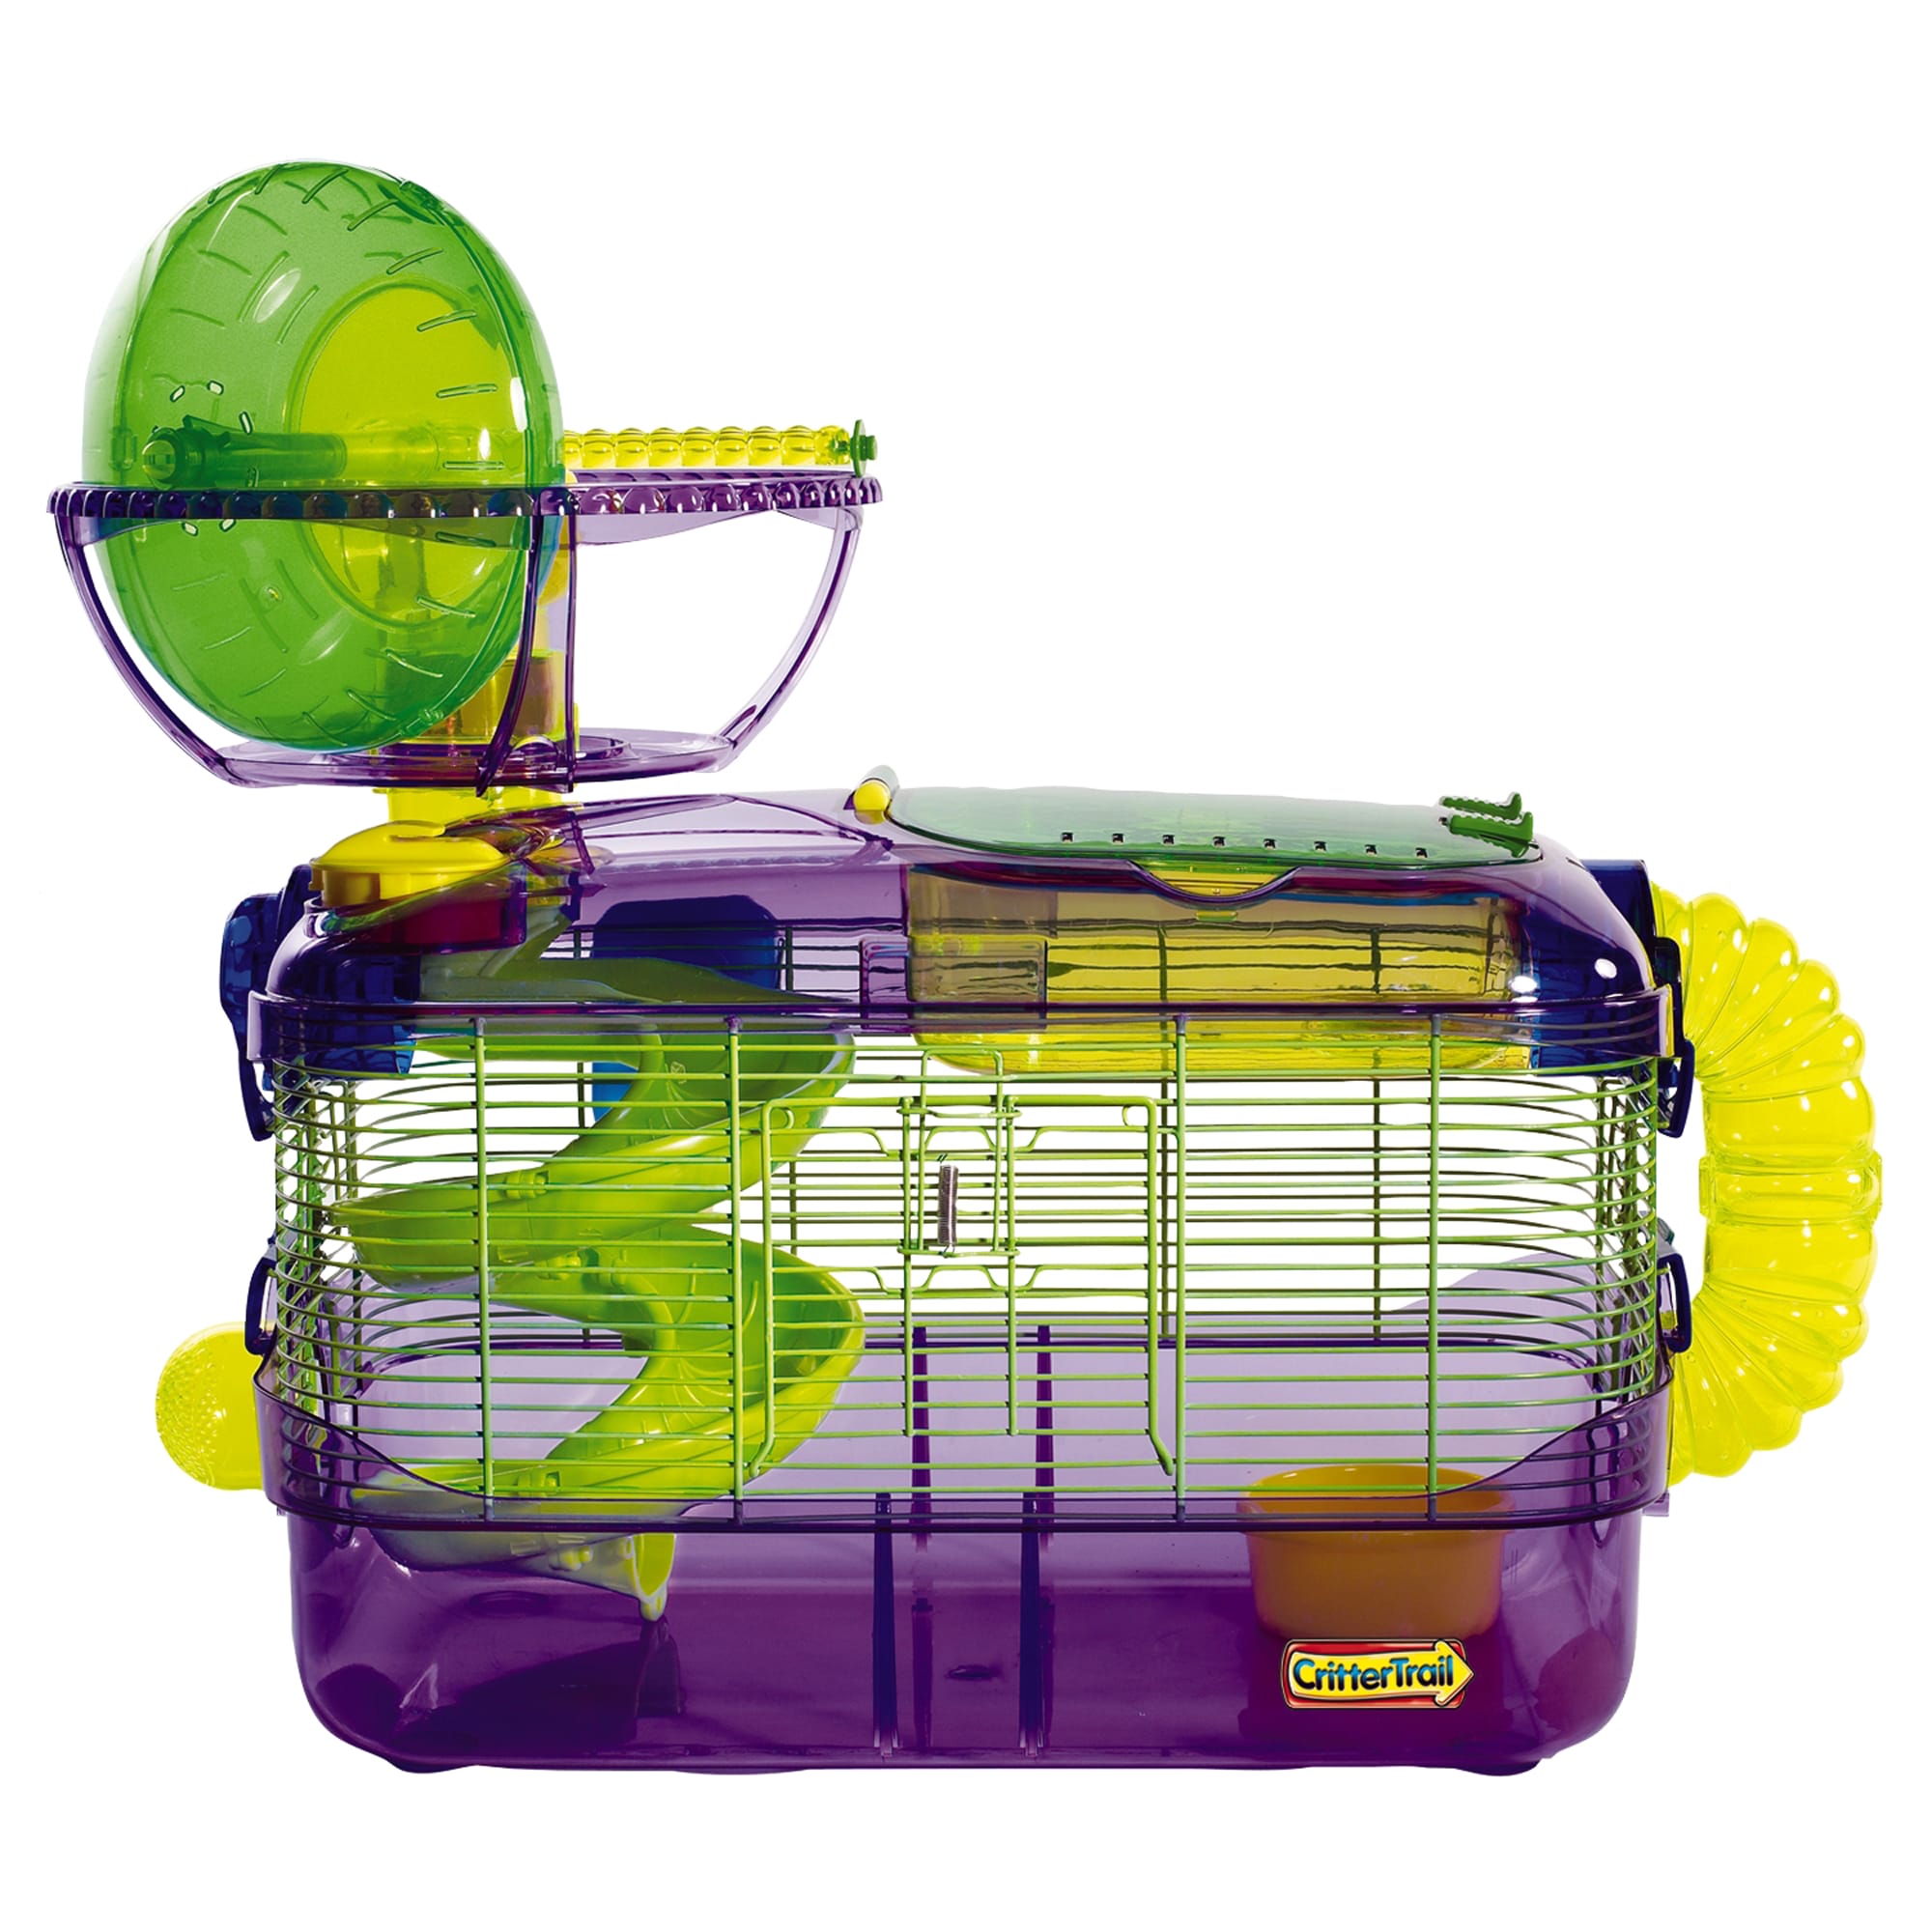 Photos - Rodent Cage / House Kaytee Super Pet CritterTrail X, 20 IN, Multi-Color 100079213 